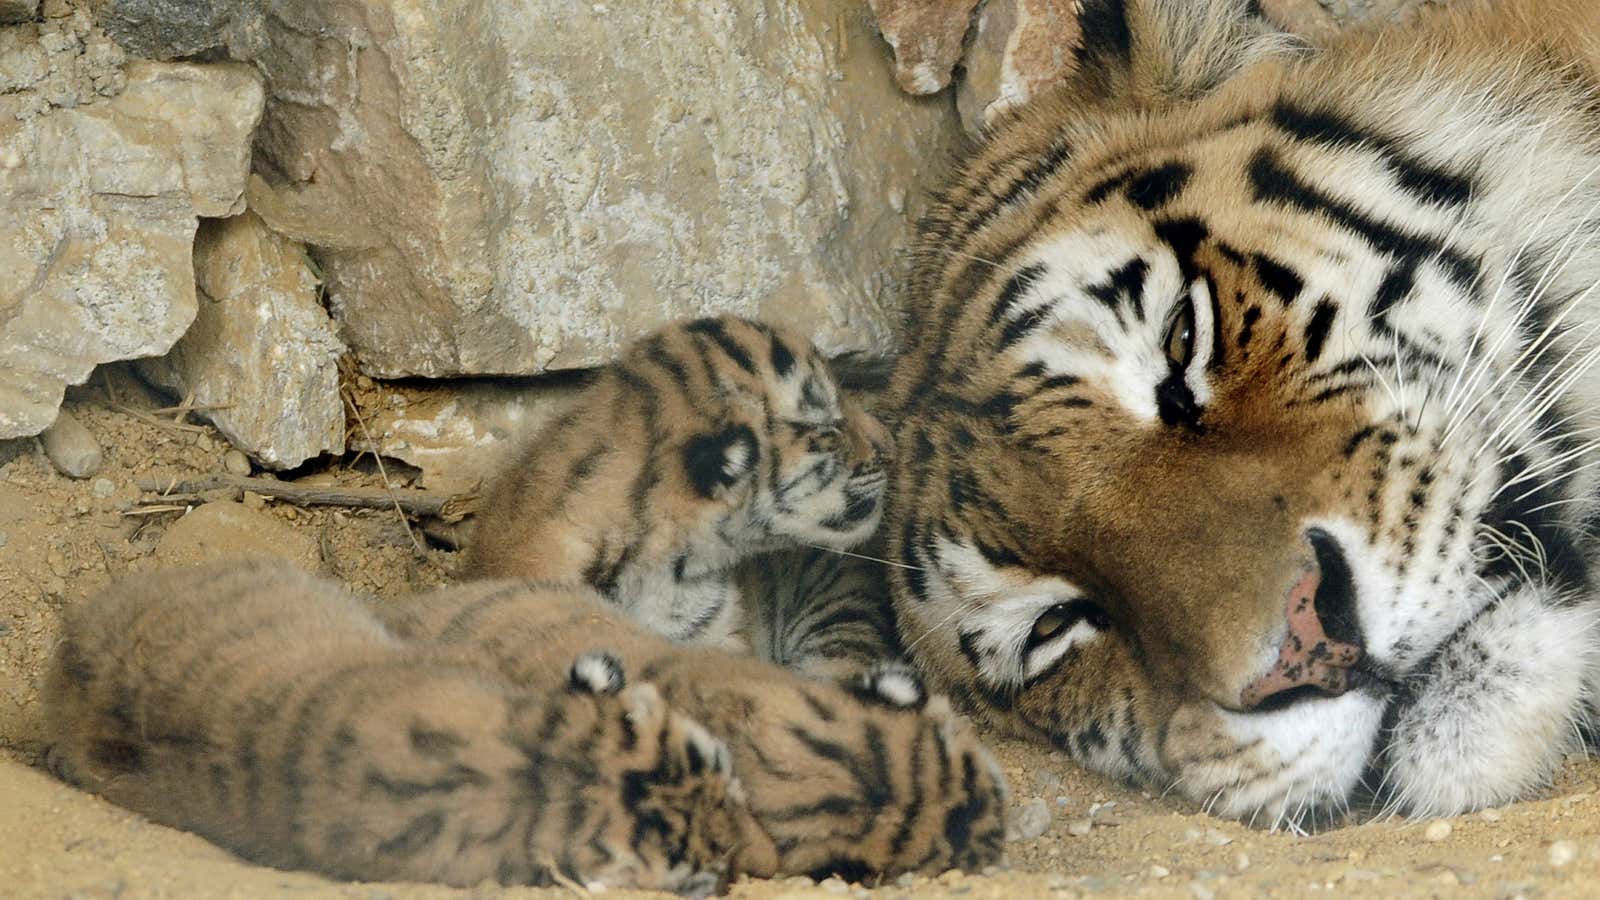 There are only a few hundred Siberian tigers left.